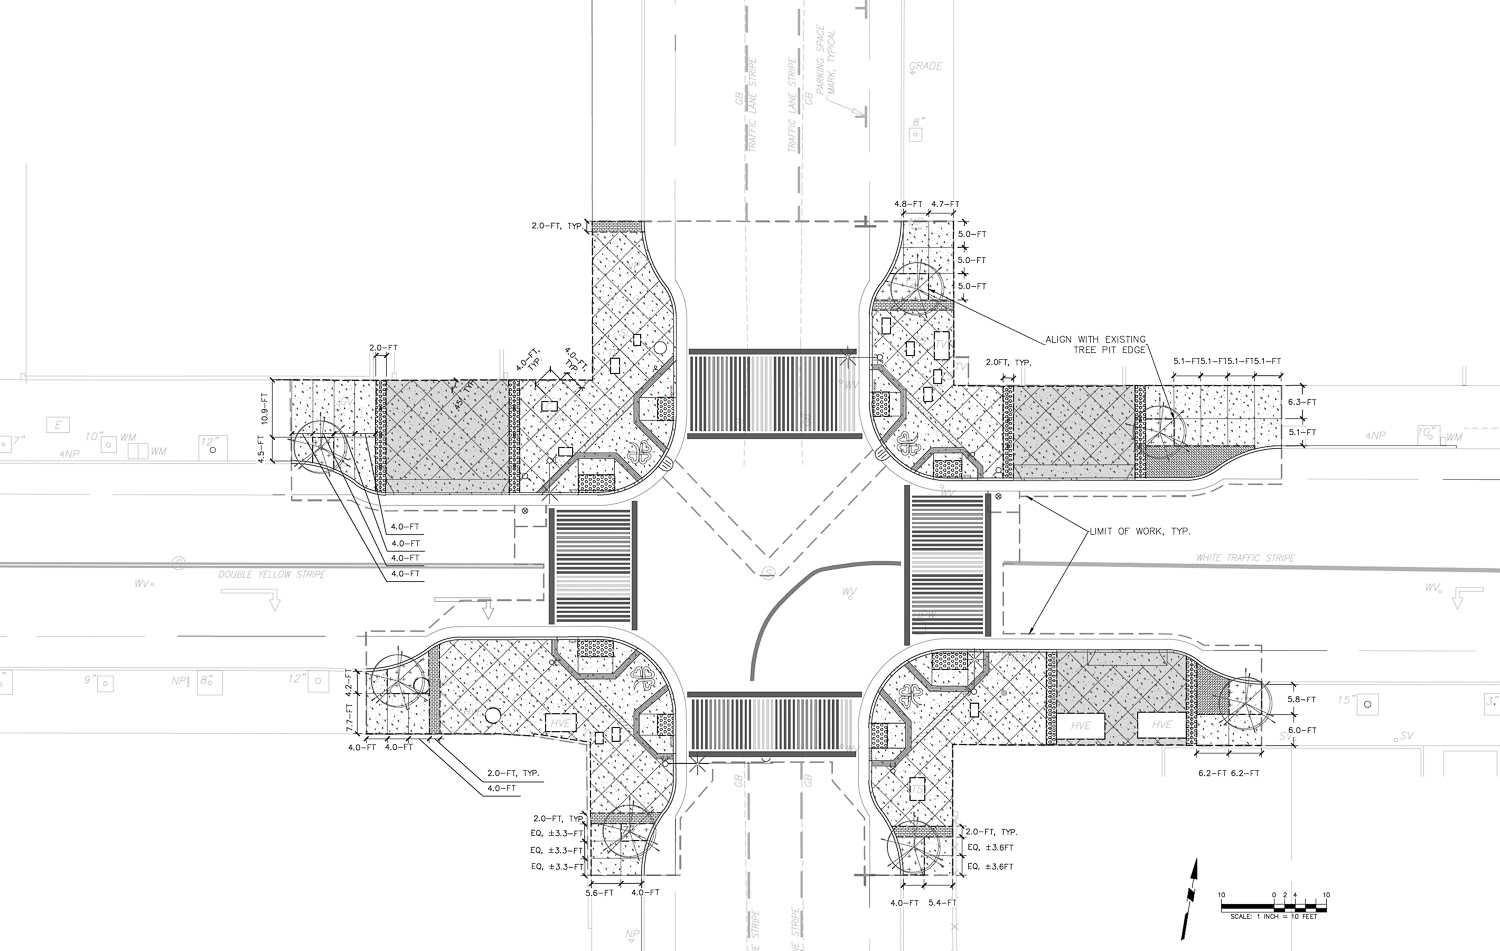 Gough Street intersection proposal from the Sacred Hard Preparatory